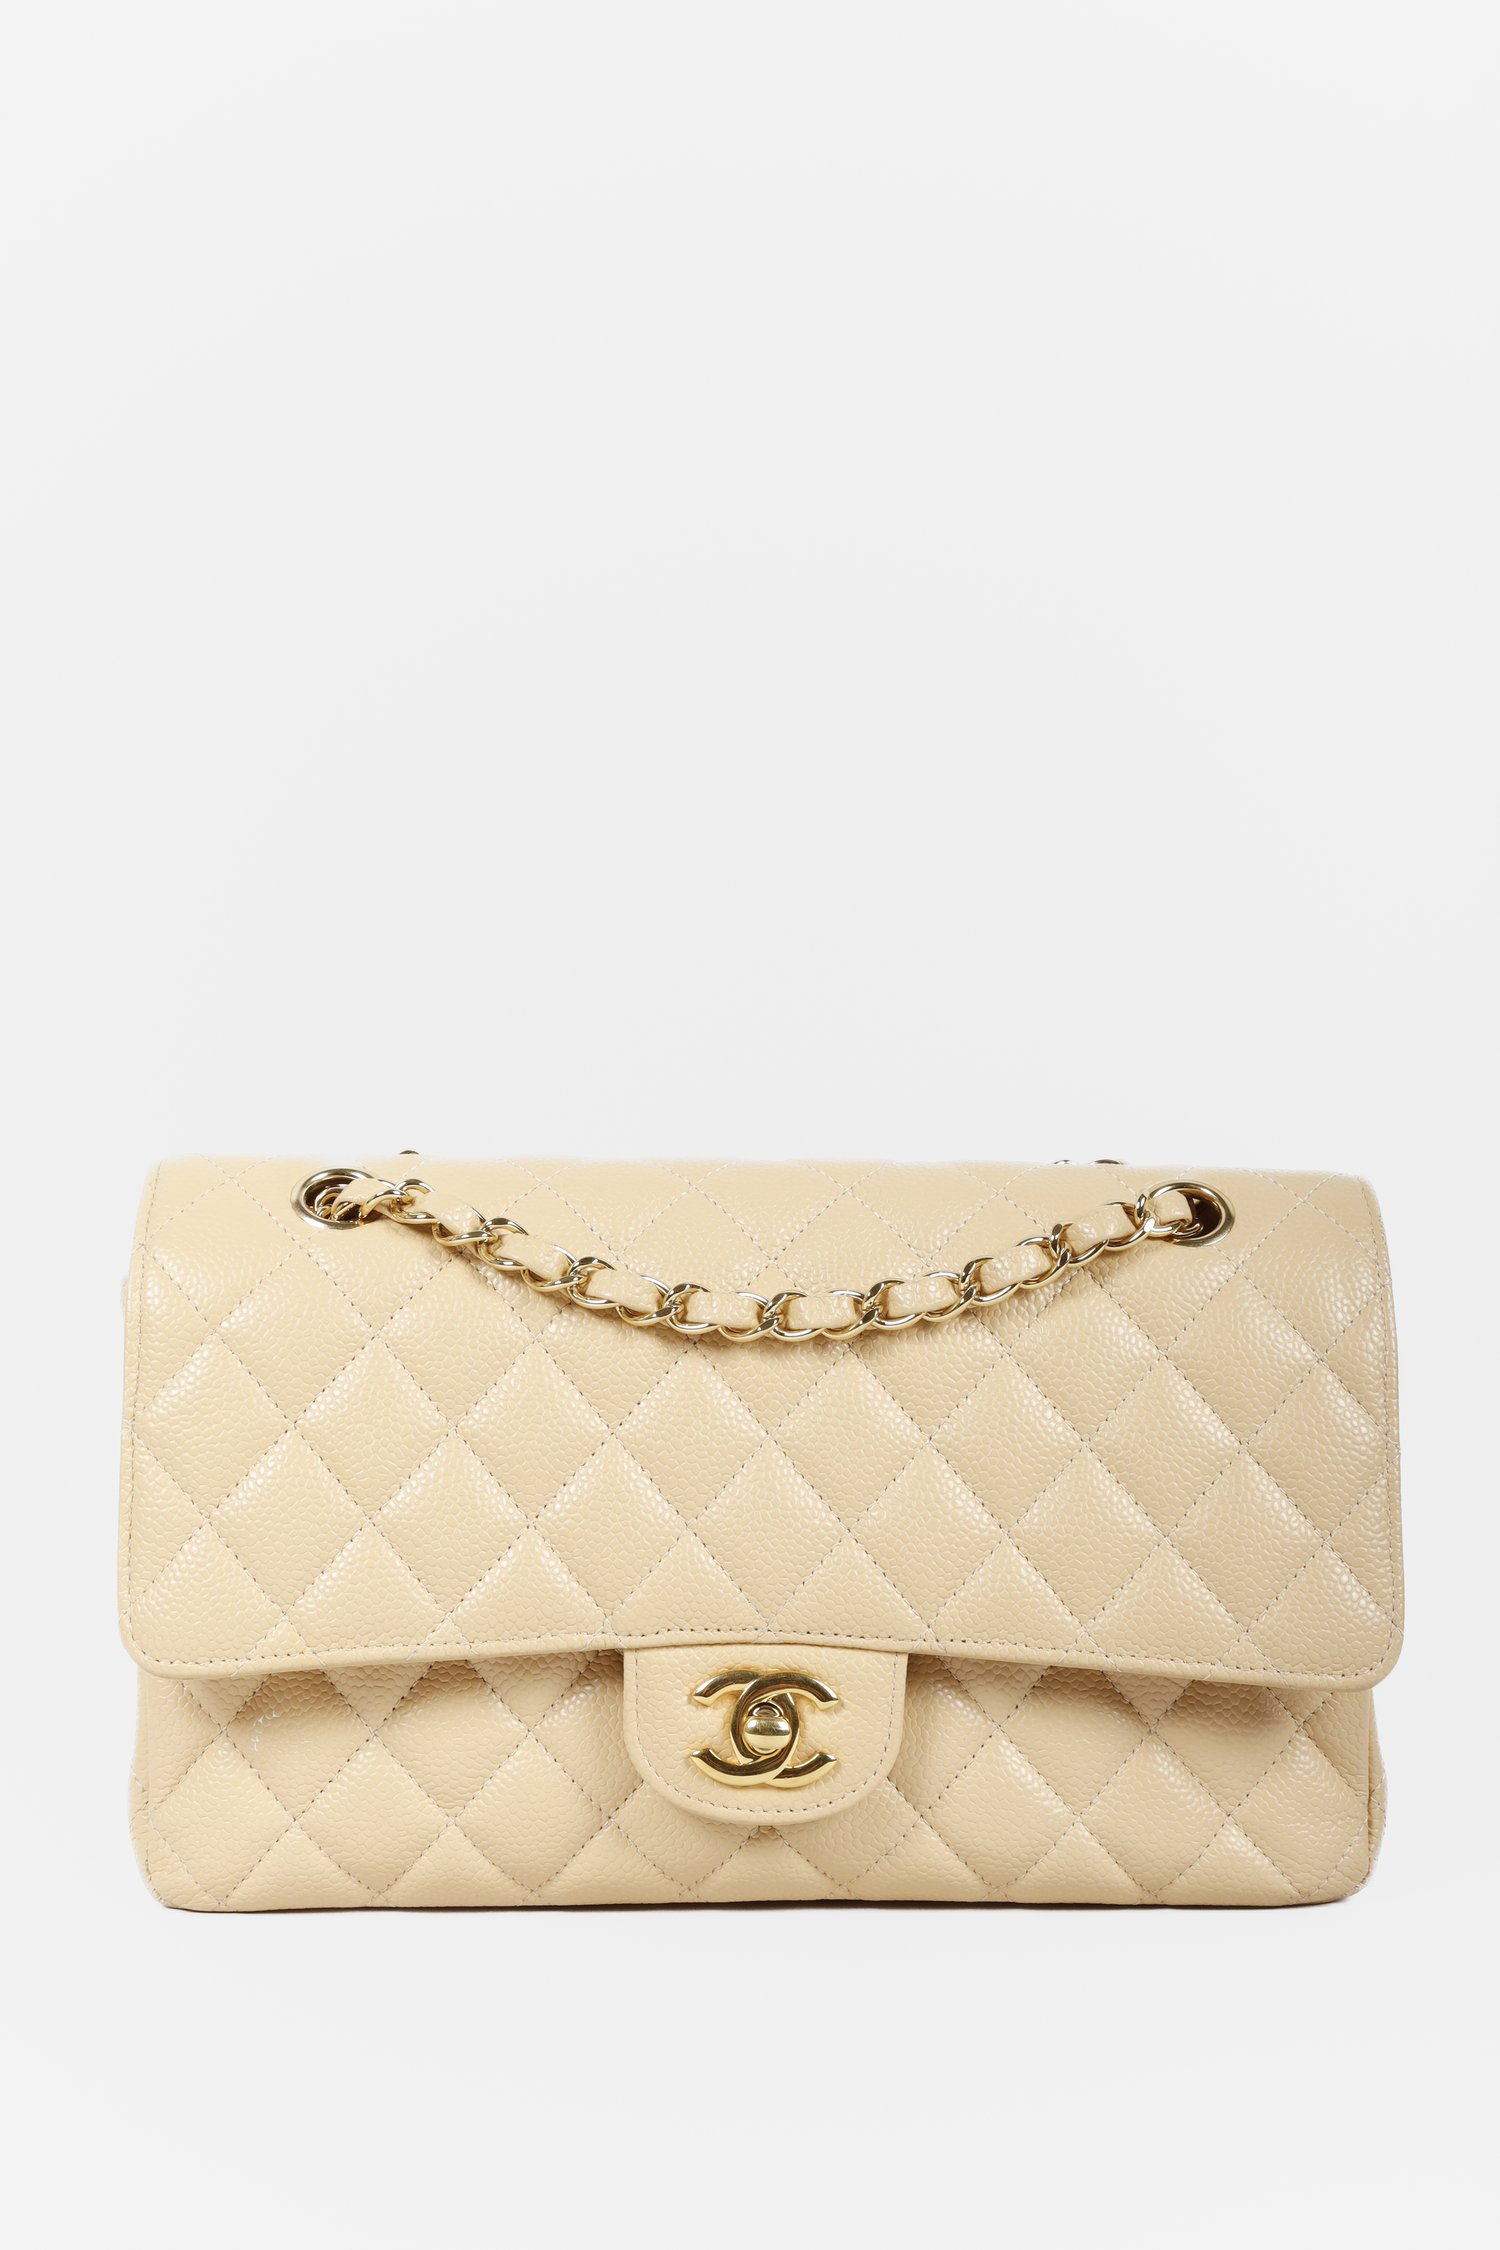 14 Almost New Chanel Classic Double Flap Medium Beige Caviar with